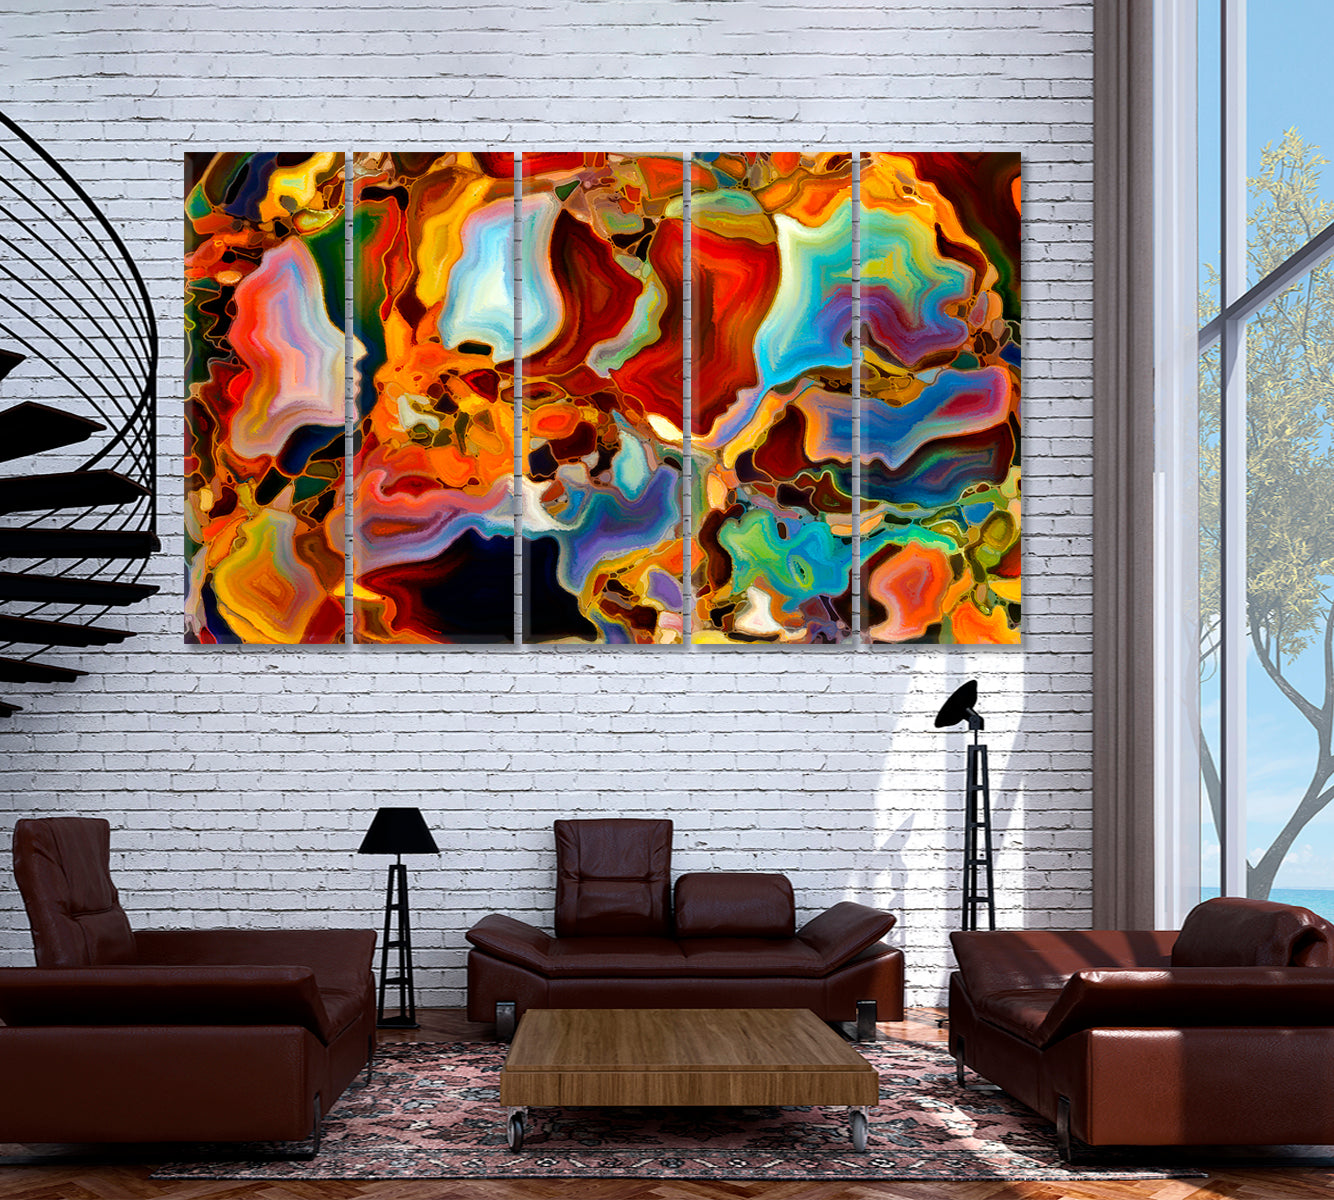 People And Colors Abstract Art Print Artesty 5 panels 36" x 24" 